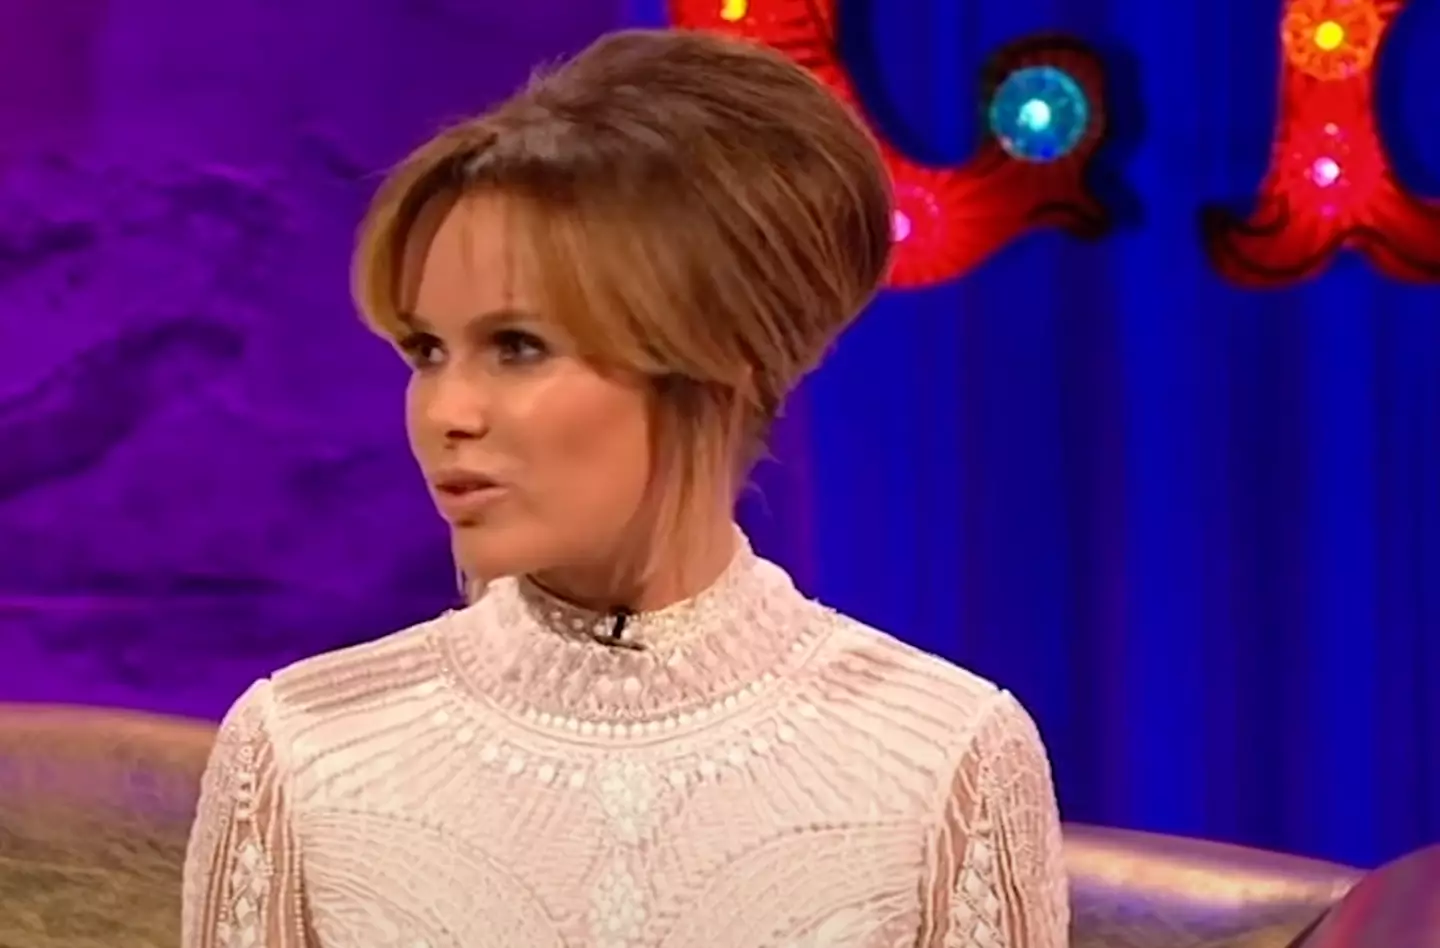 Amanda Holden has spoken about her experience with Jimmy Savile.